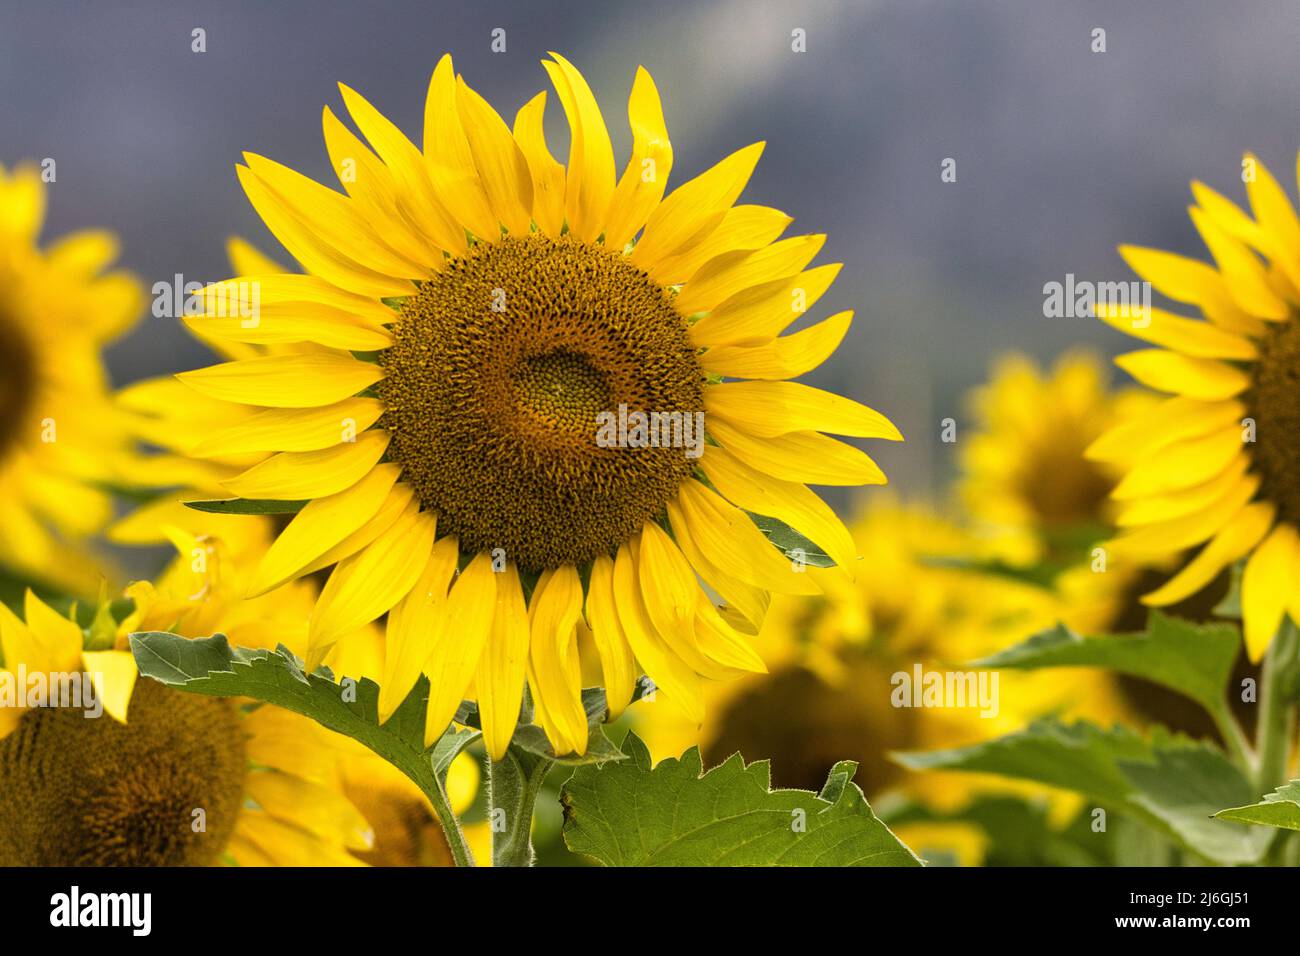 Ultra close-up of sunflowers in a sustainable energy farm. Stock Photo